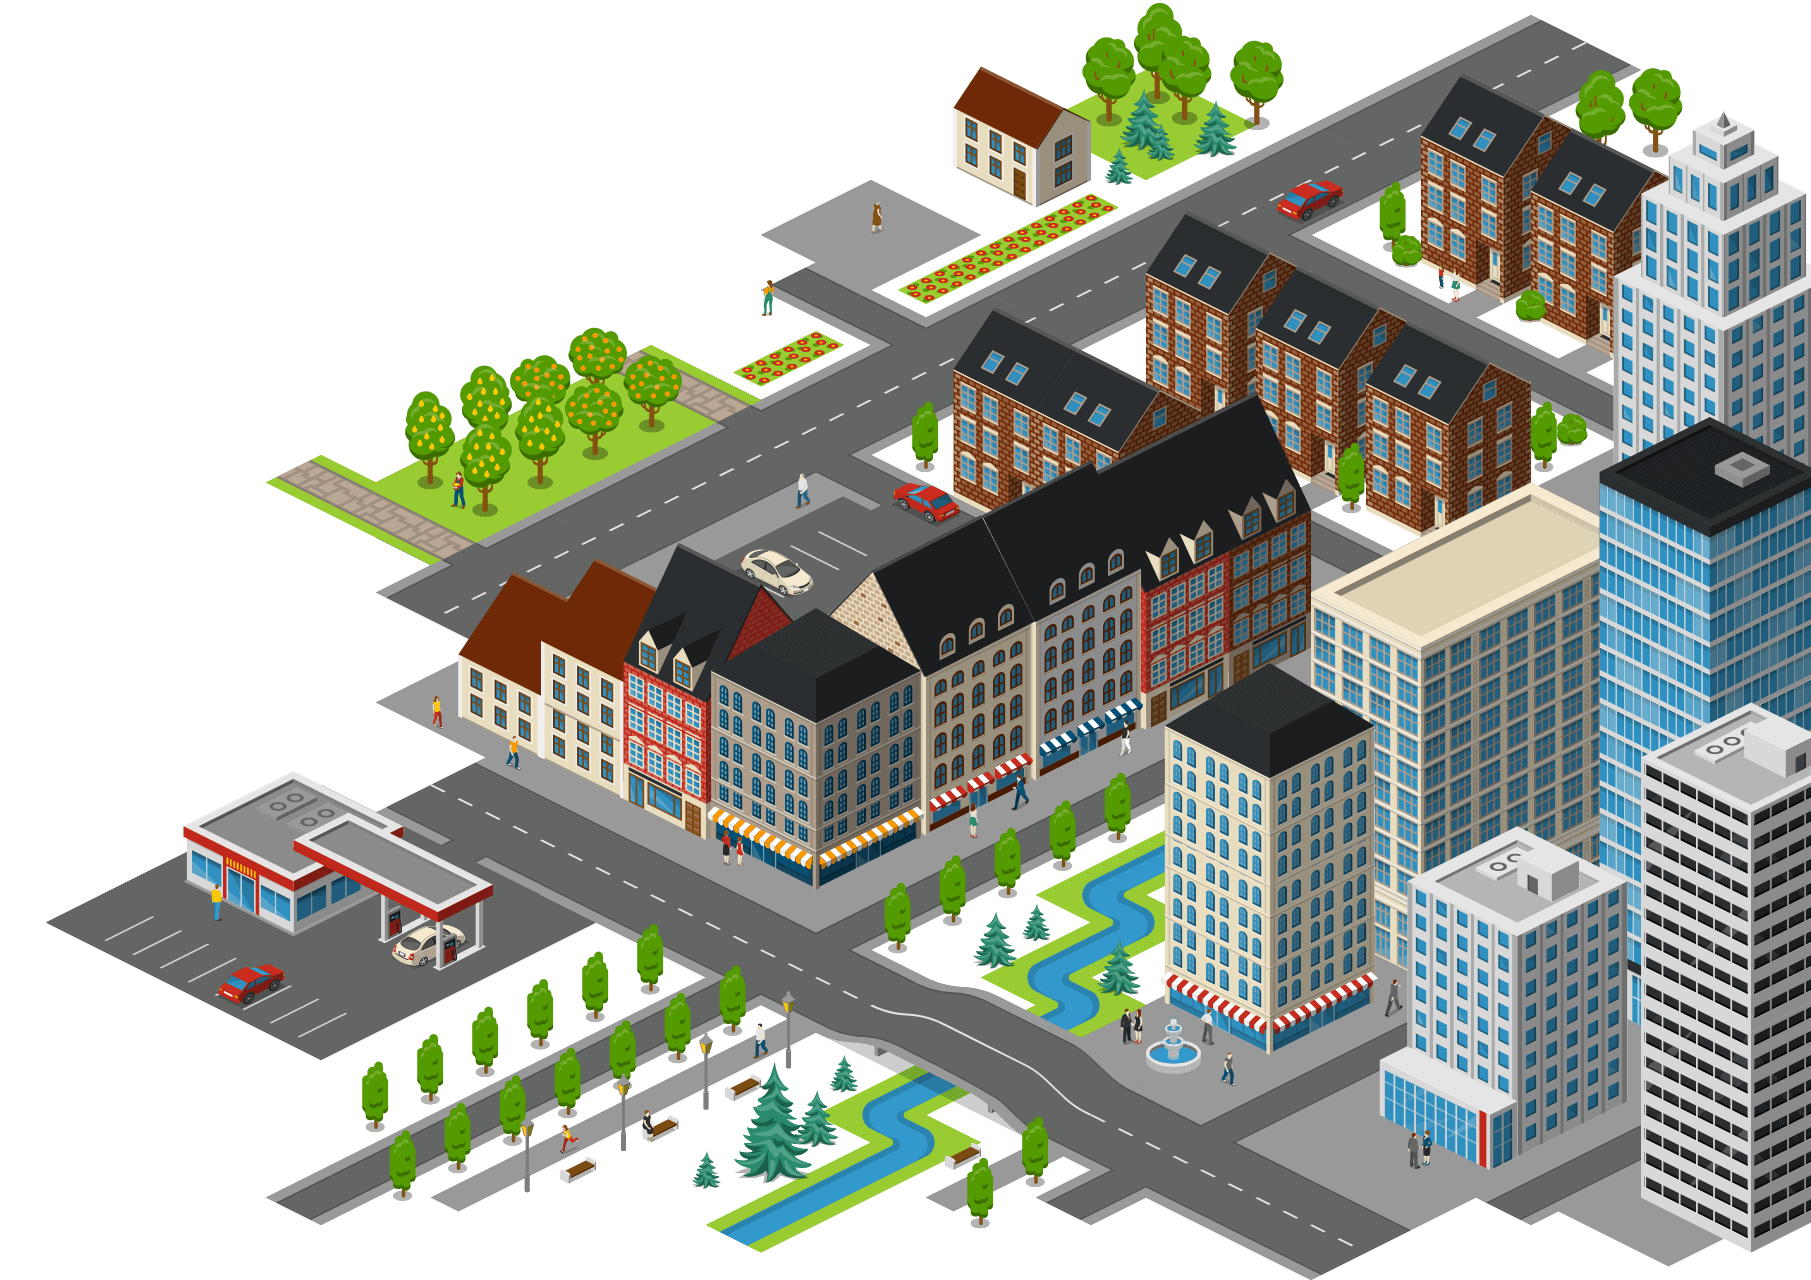 Centralized Real Estate Management System for <strong><mark style="background-color:rgba(0, 0, 0, 0)" class="has-inline-color has-vivid-red-color">Family Offices</mark></strong>